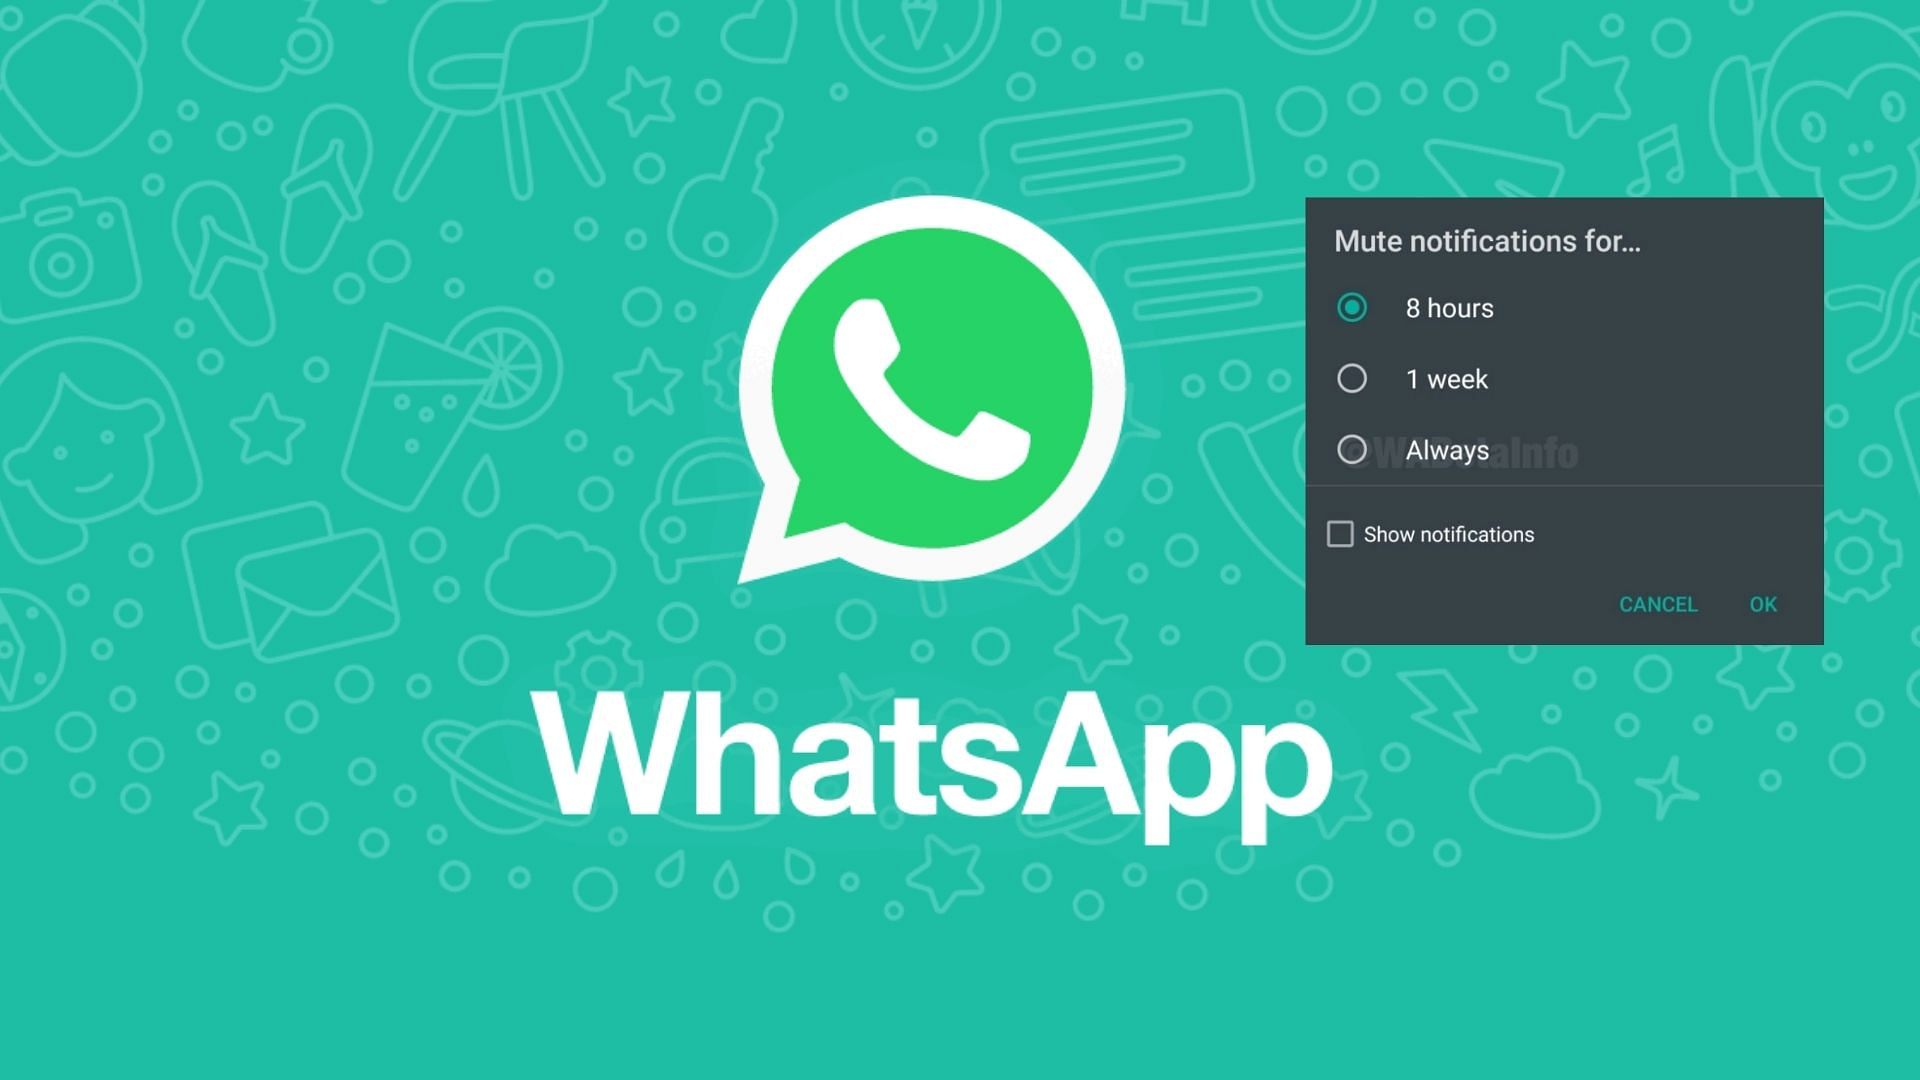 WhatsApp Mute Forever Feature: Online messaging app WhatsApp has introduced an ‘Always’ mute option that will allow you to mute the notifications of a WhatsApp chat or a group forever. 